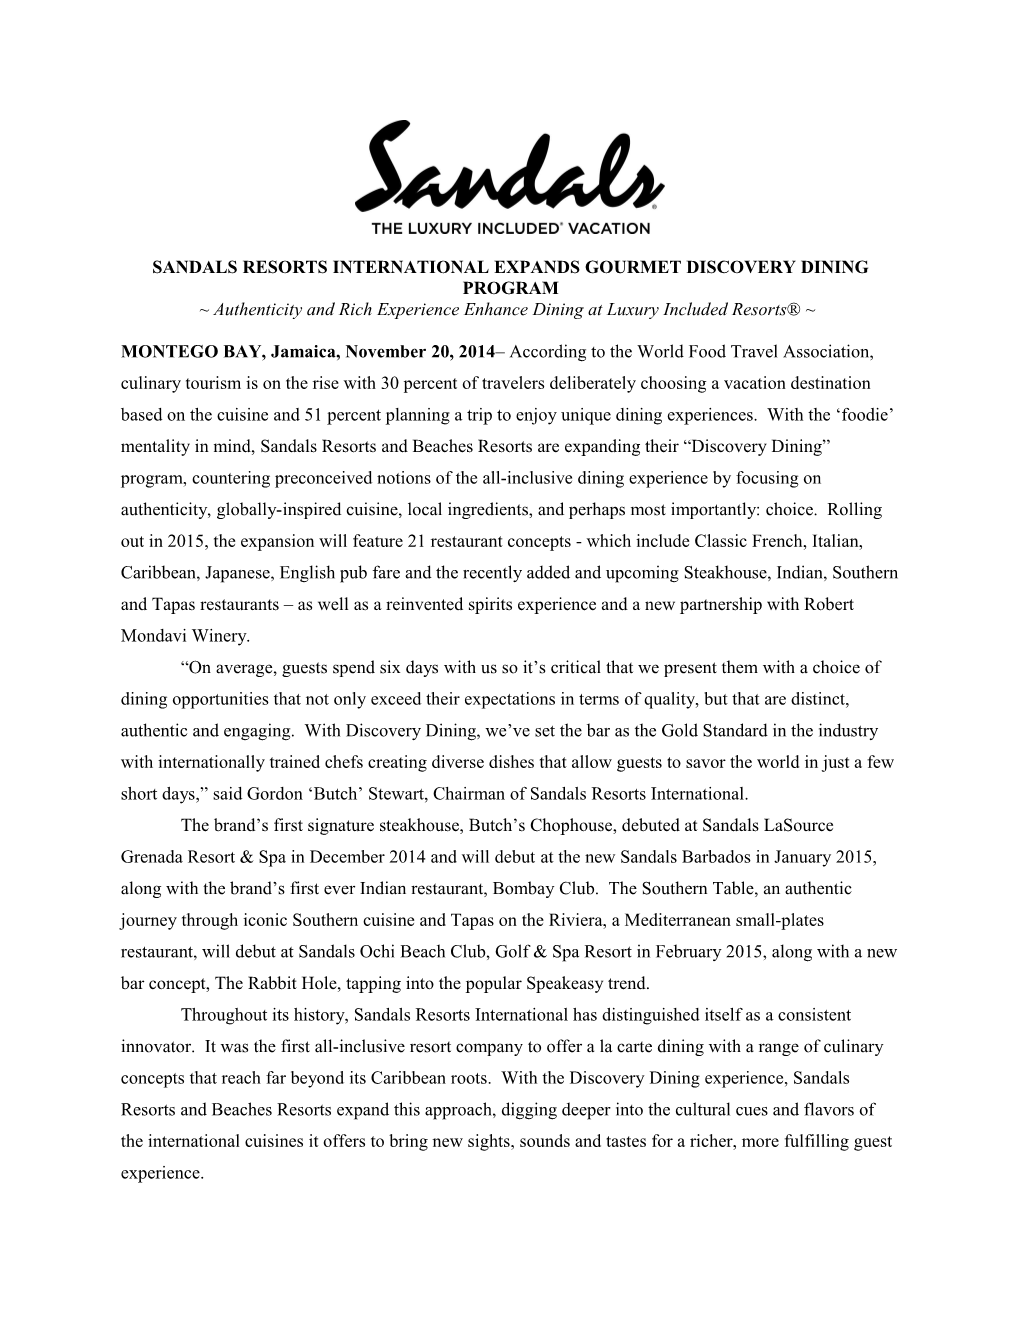 Sandals Resorts International Expands Gourmet Discovery Dining Program